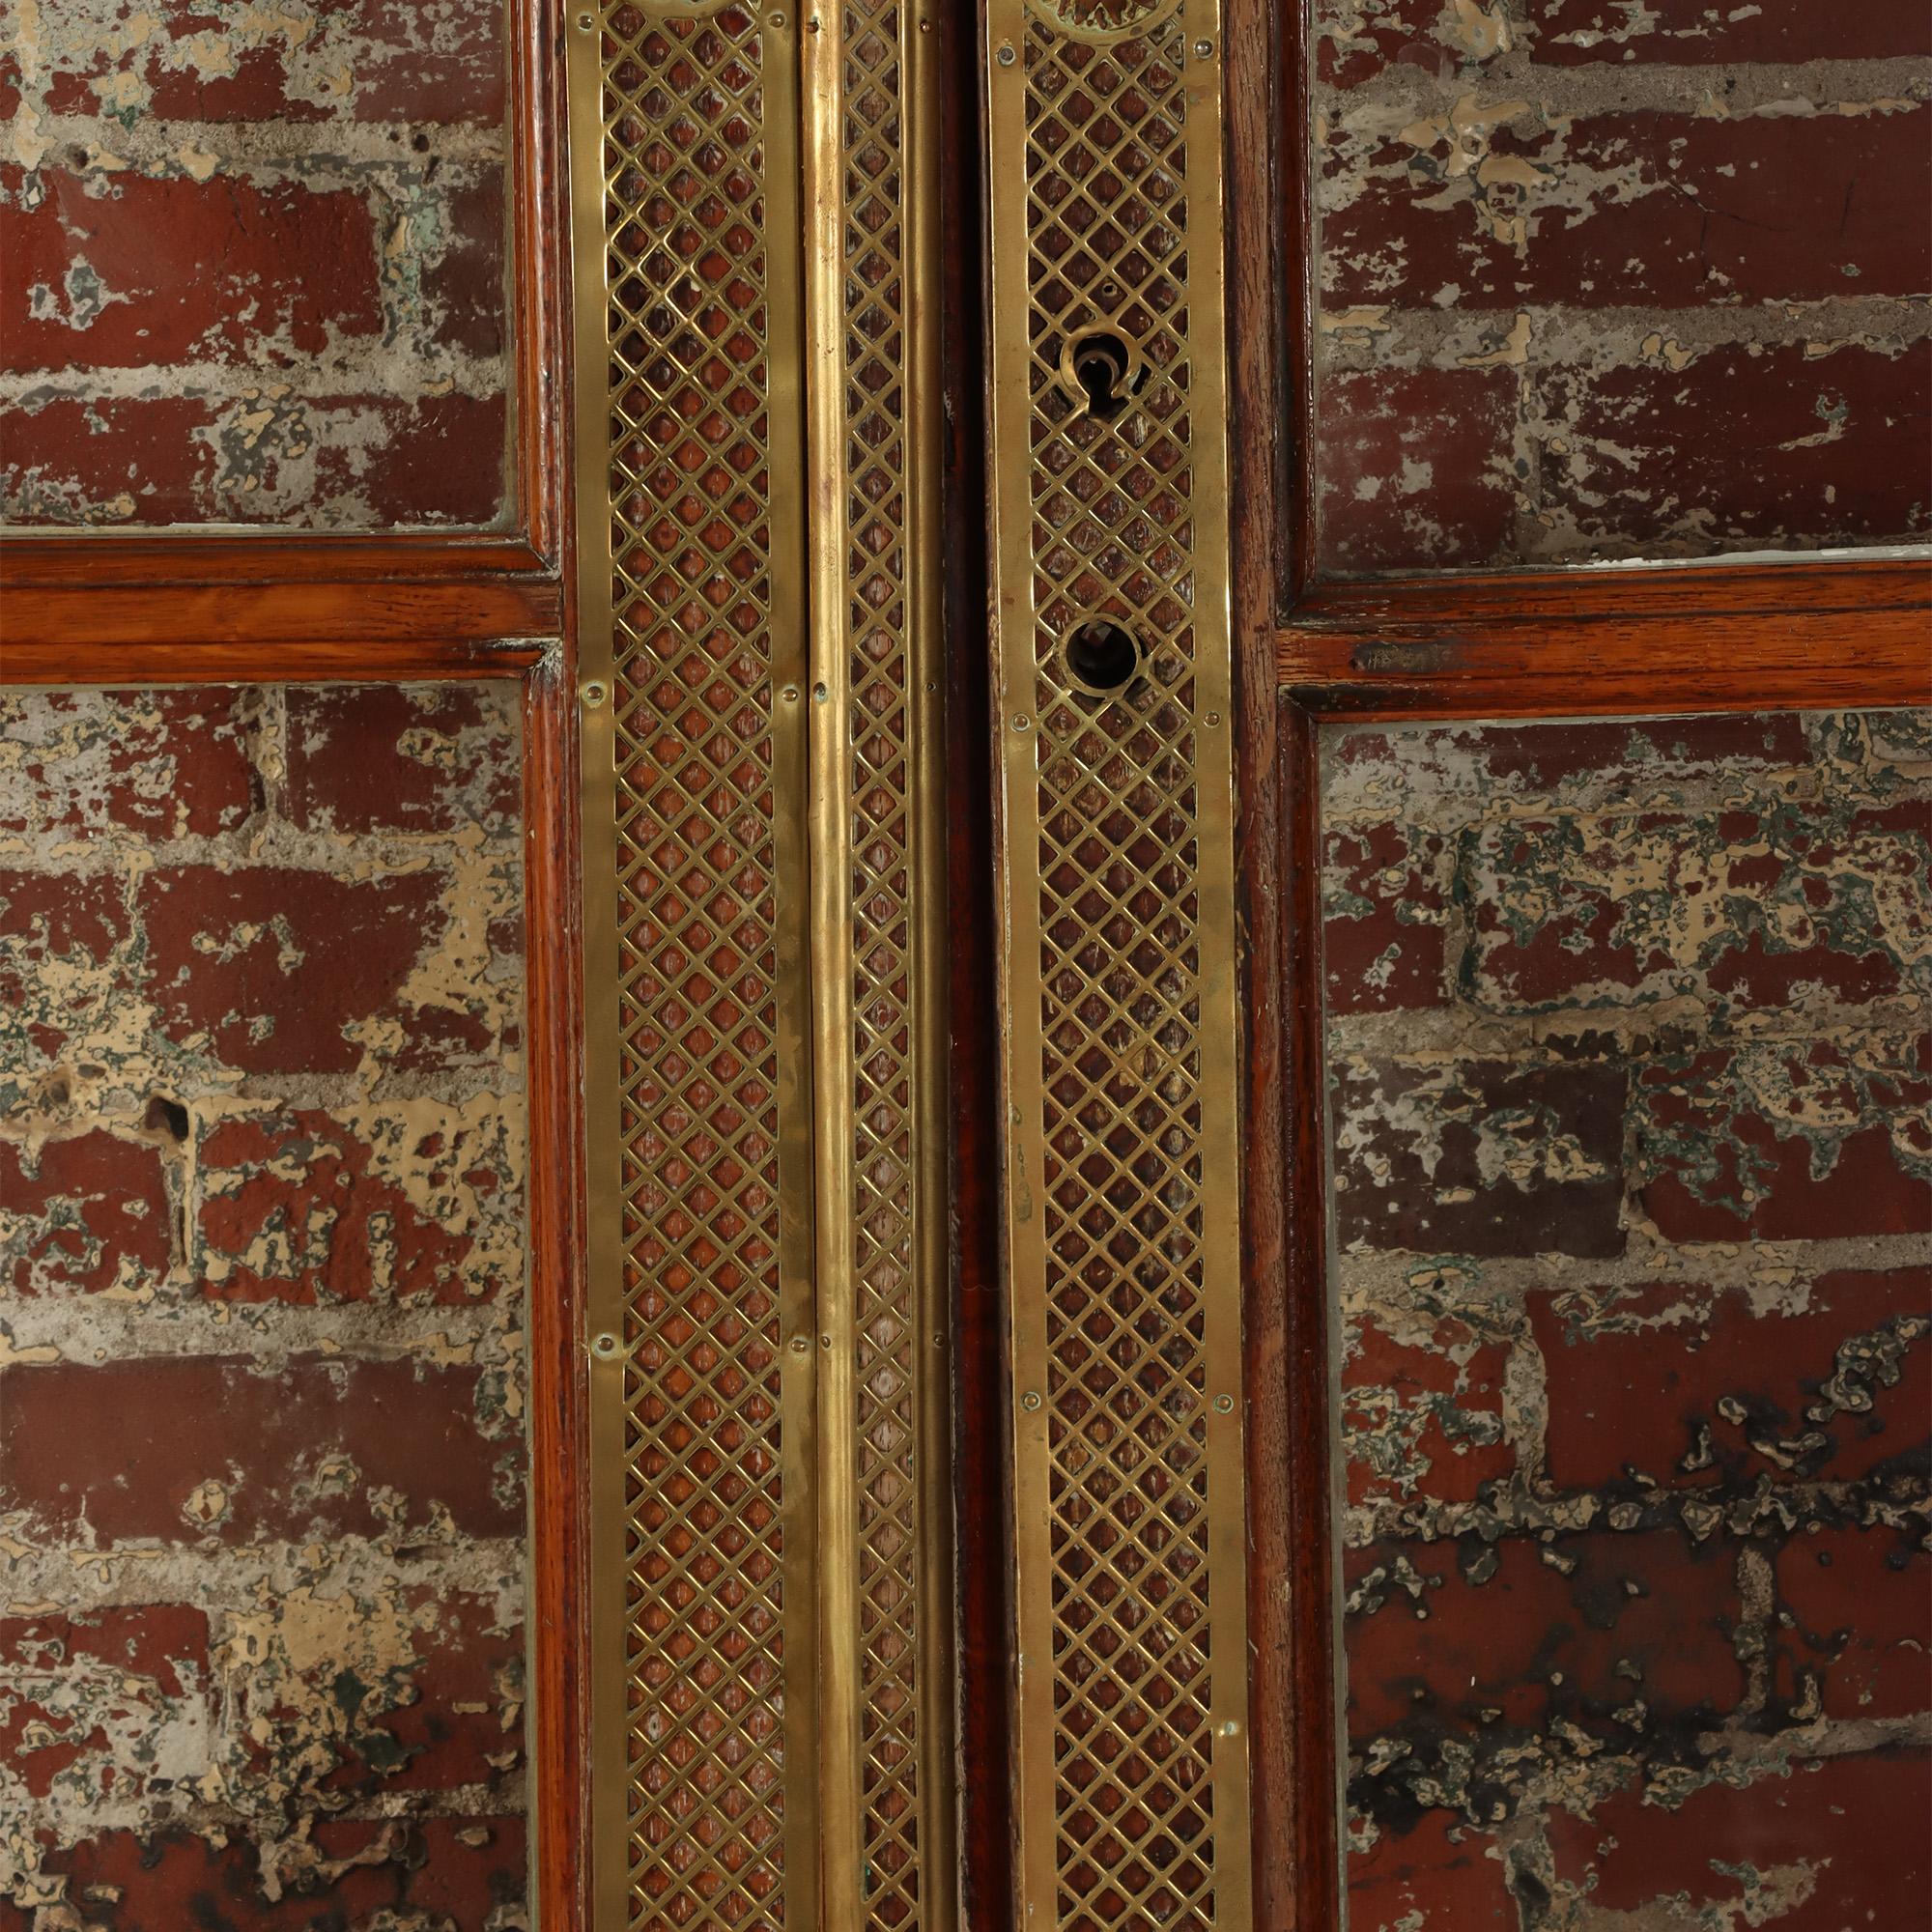 A pair of French oak doors with brass details. C 1900
Total W: 67